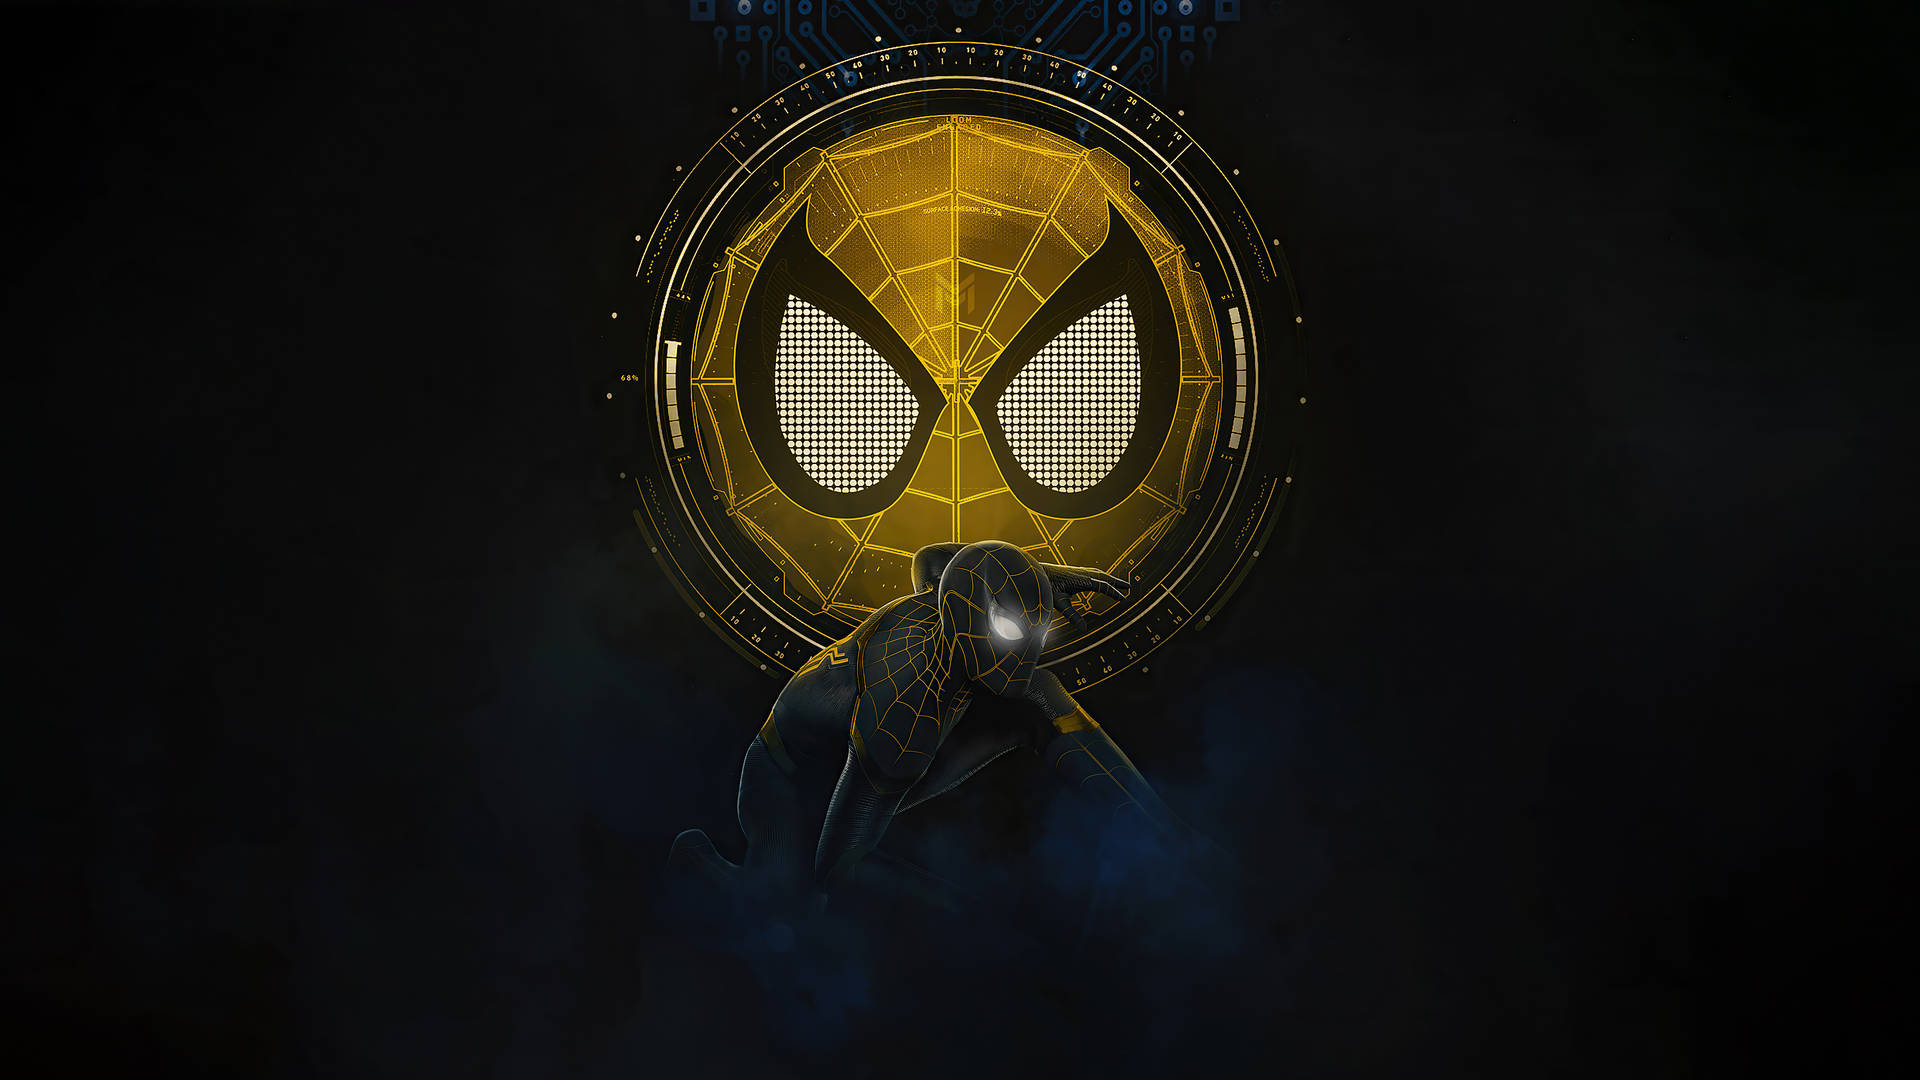 5120X2880 Spider Man No Way Home Wallpaper and Background